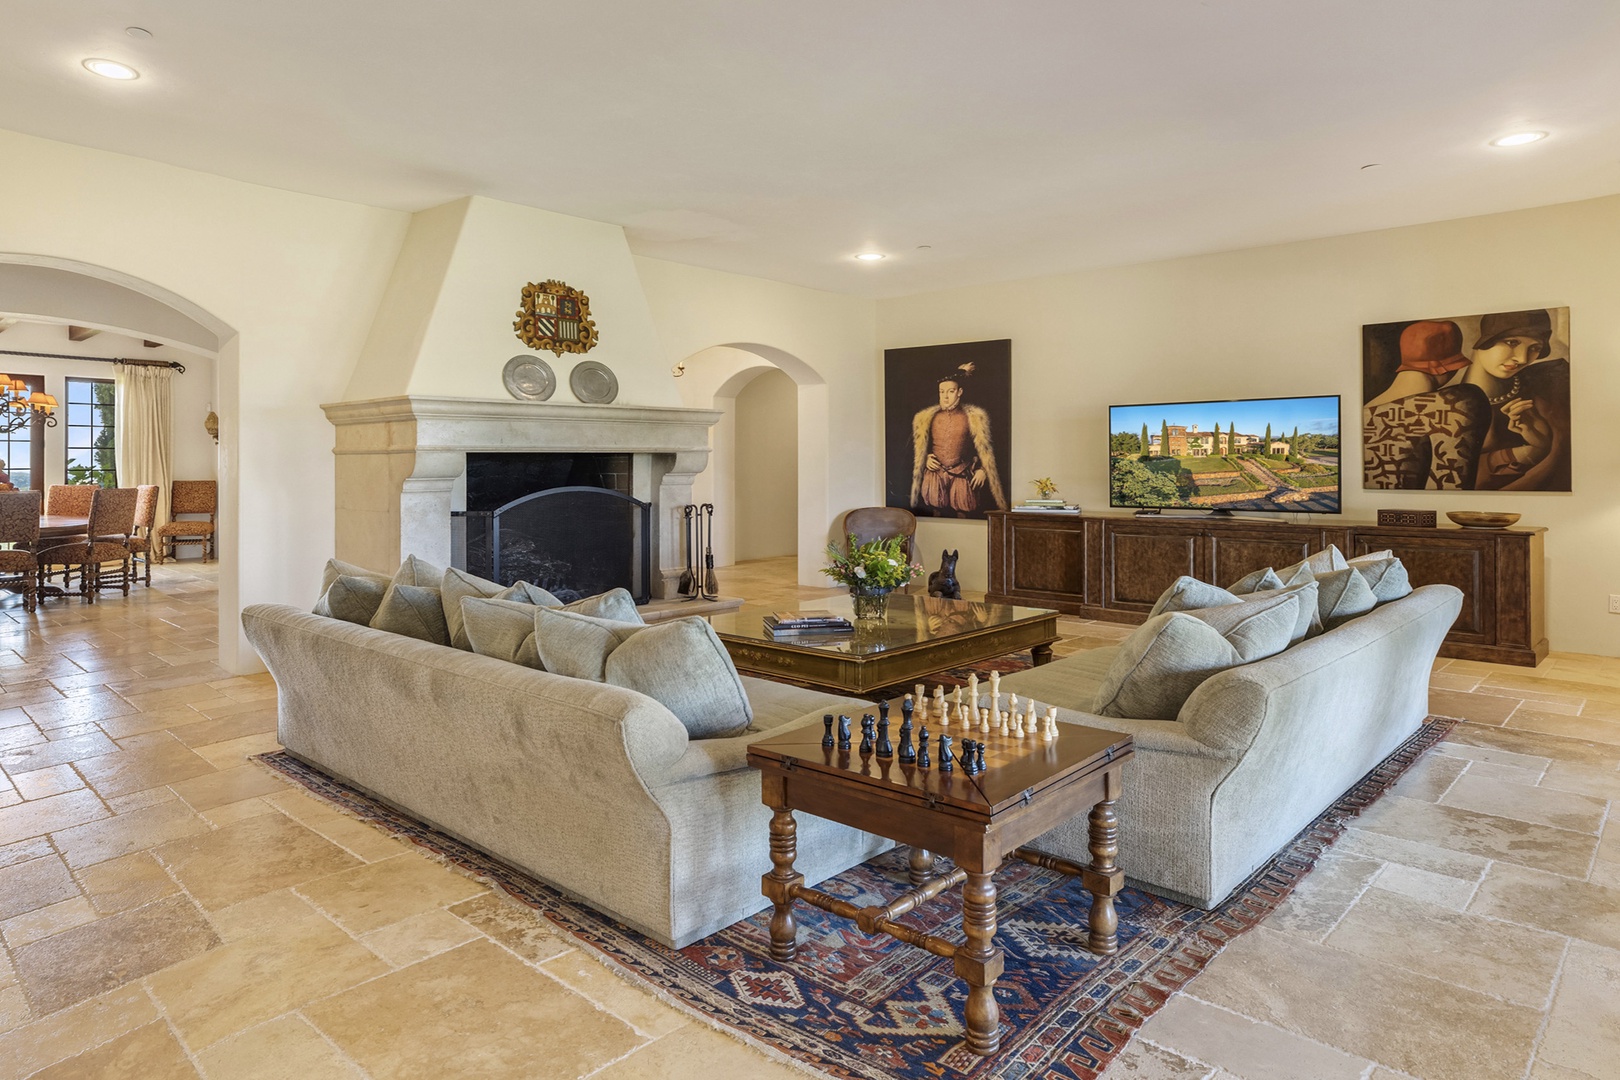 Fairfield Vacation Rentals, Villa Capricho - Play chess, watch the ball game or cozy up by the fire in the comfortably appointed family room.